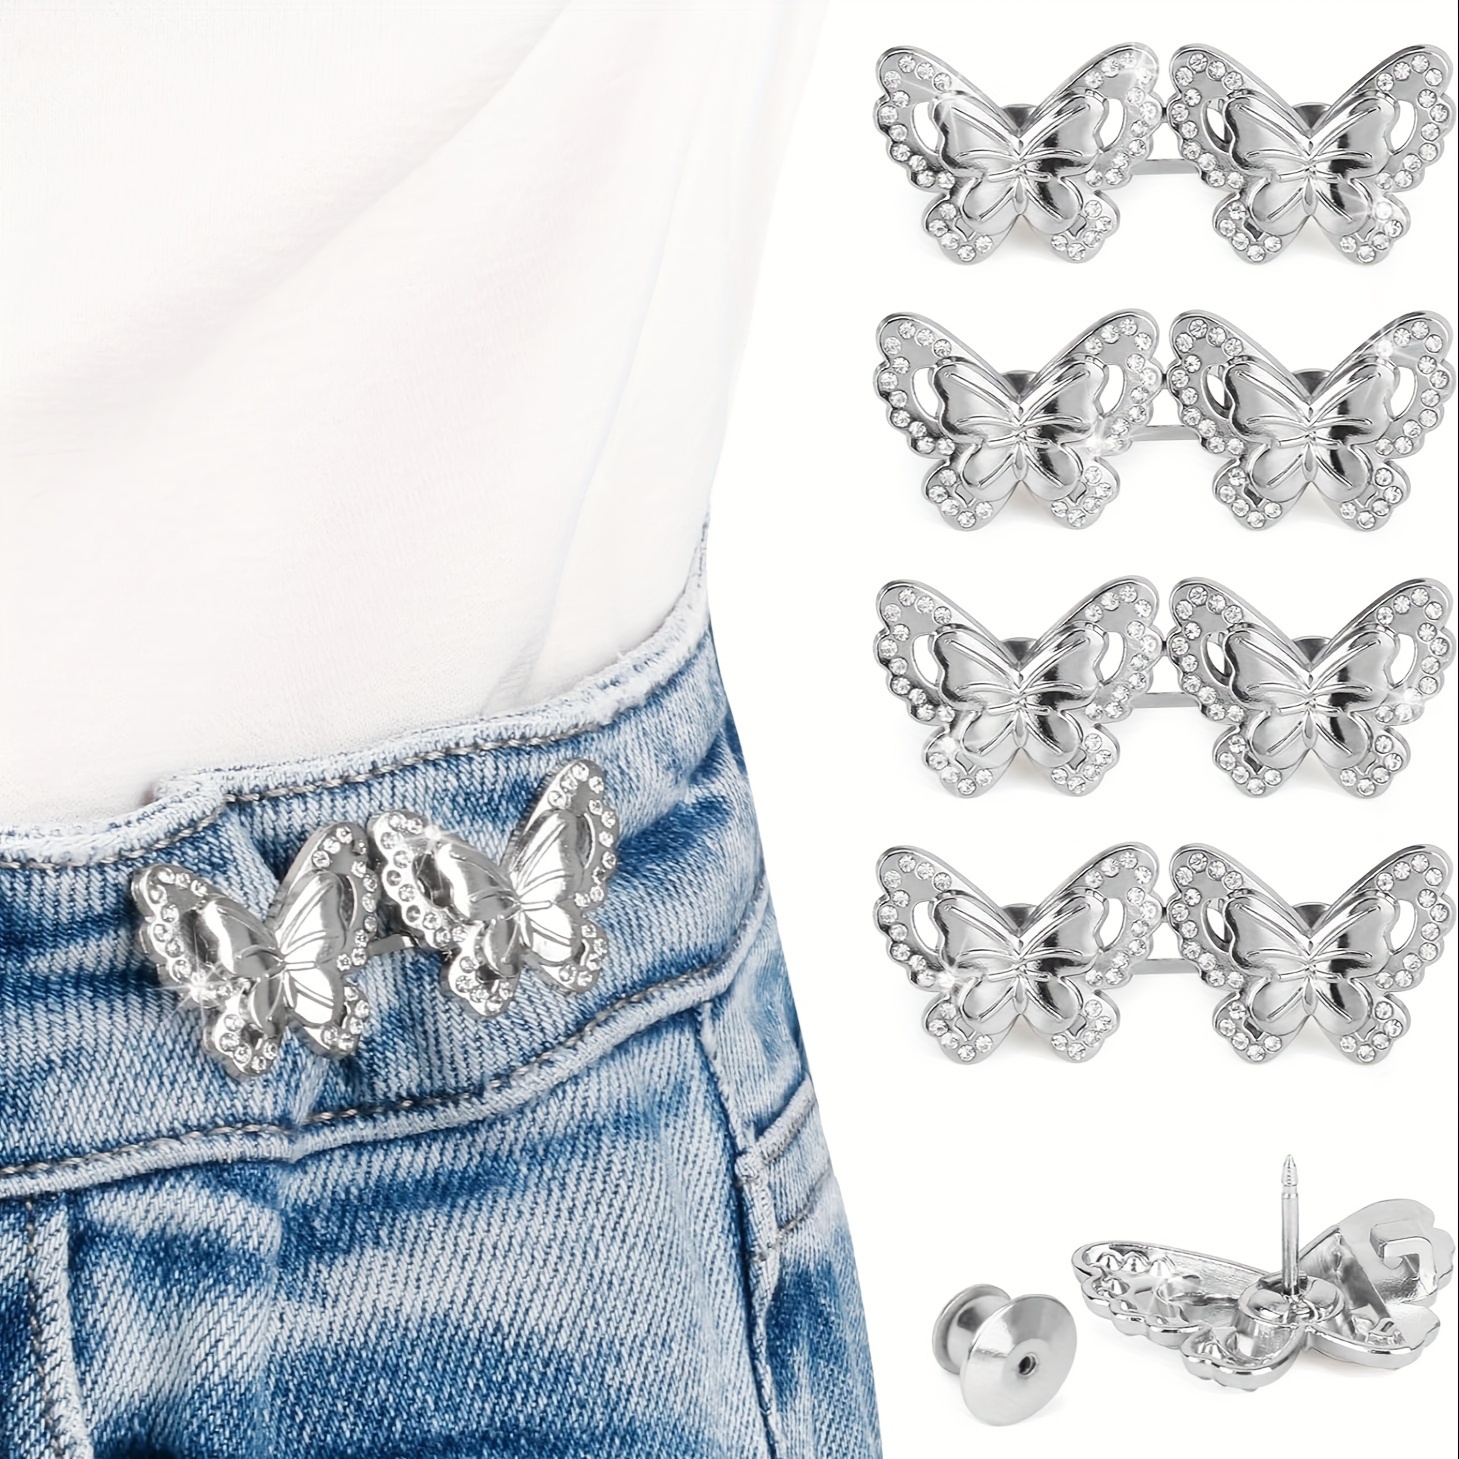 Faotup 8PCS Daisy and Butterfly's Pant Clips for Waist Tightener,Adjustable  Waist Buckles,(Black and White Daisy Type Each Two,Gold and Silver